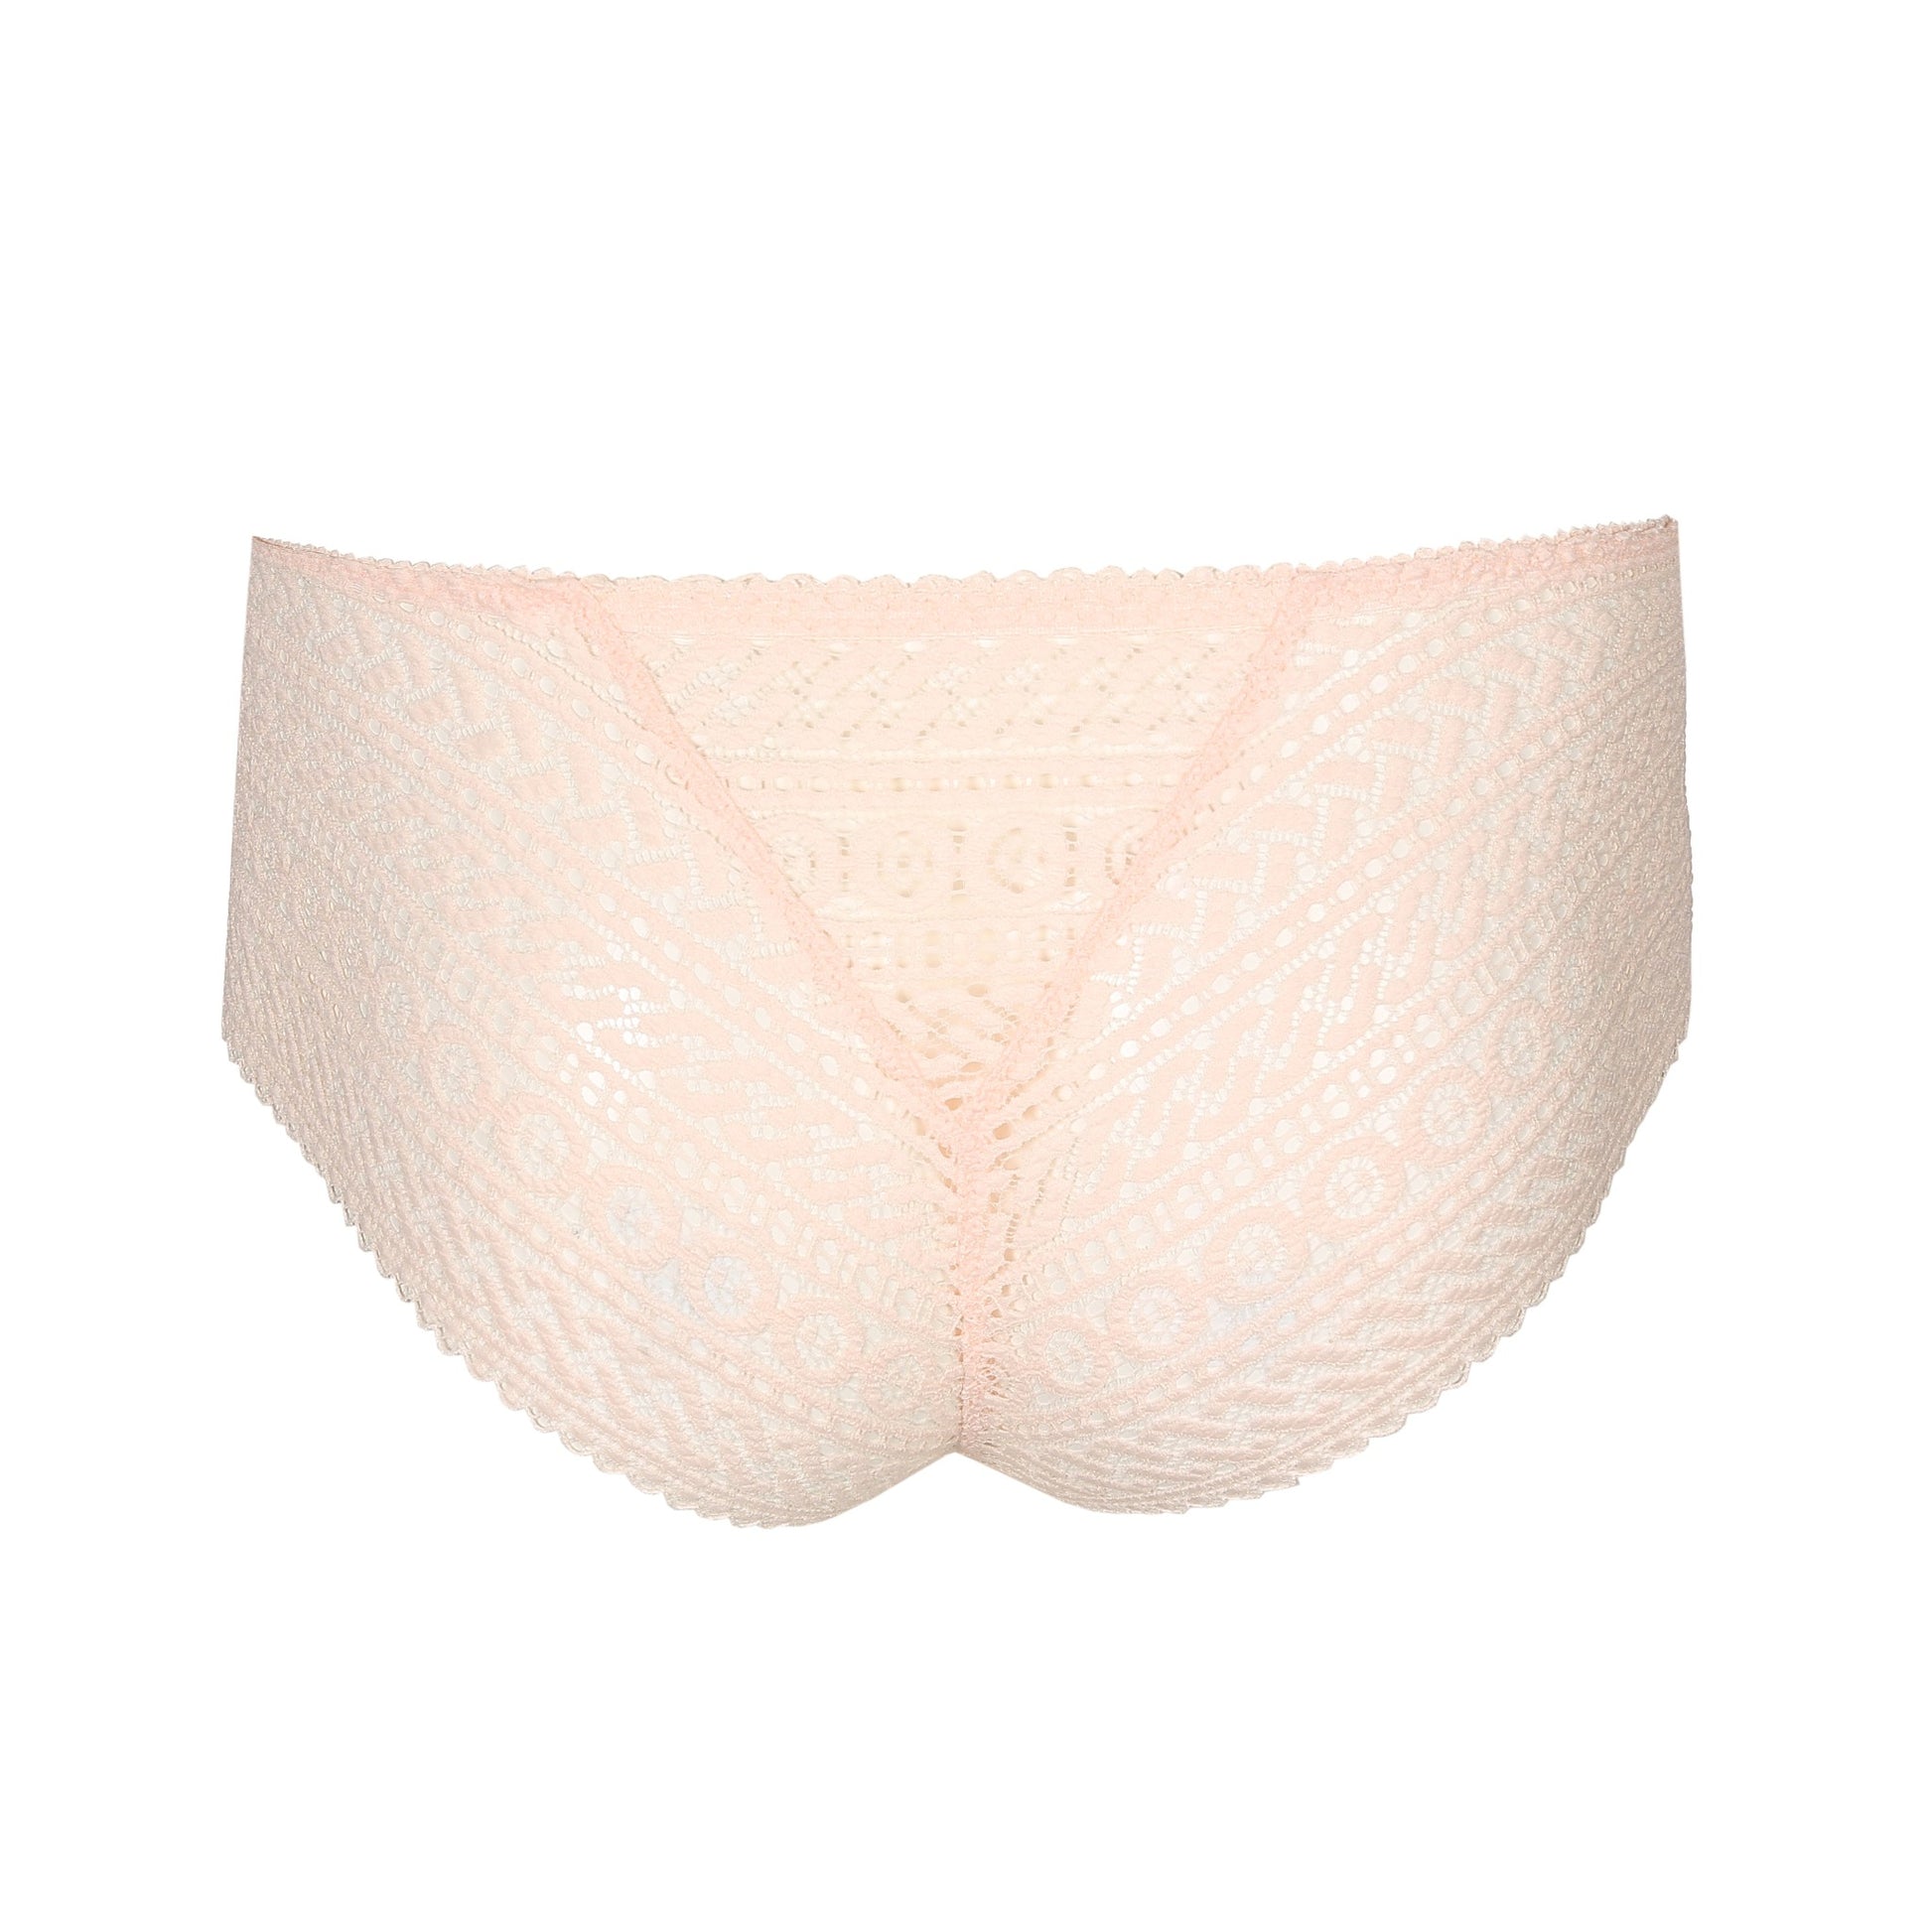 Back view of the Montara Luxury Thong with all over lace design in Crystal Pink by PrimaDonna.